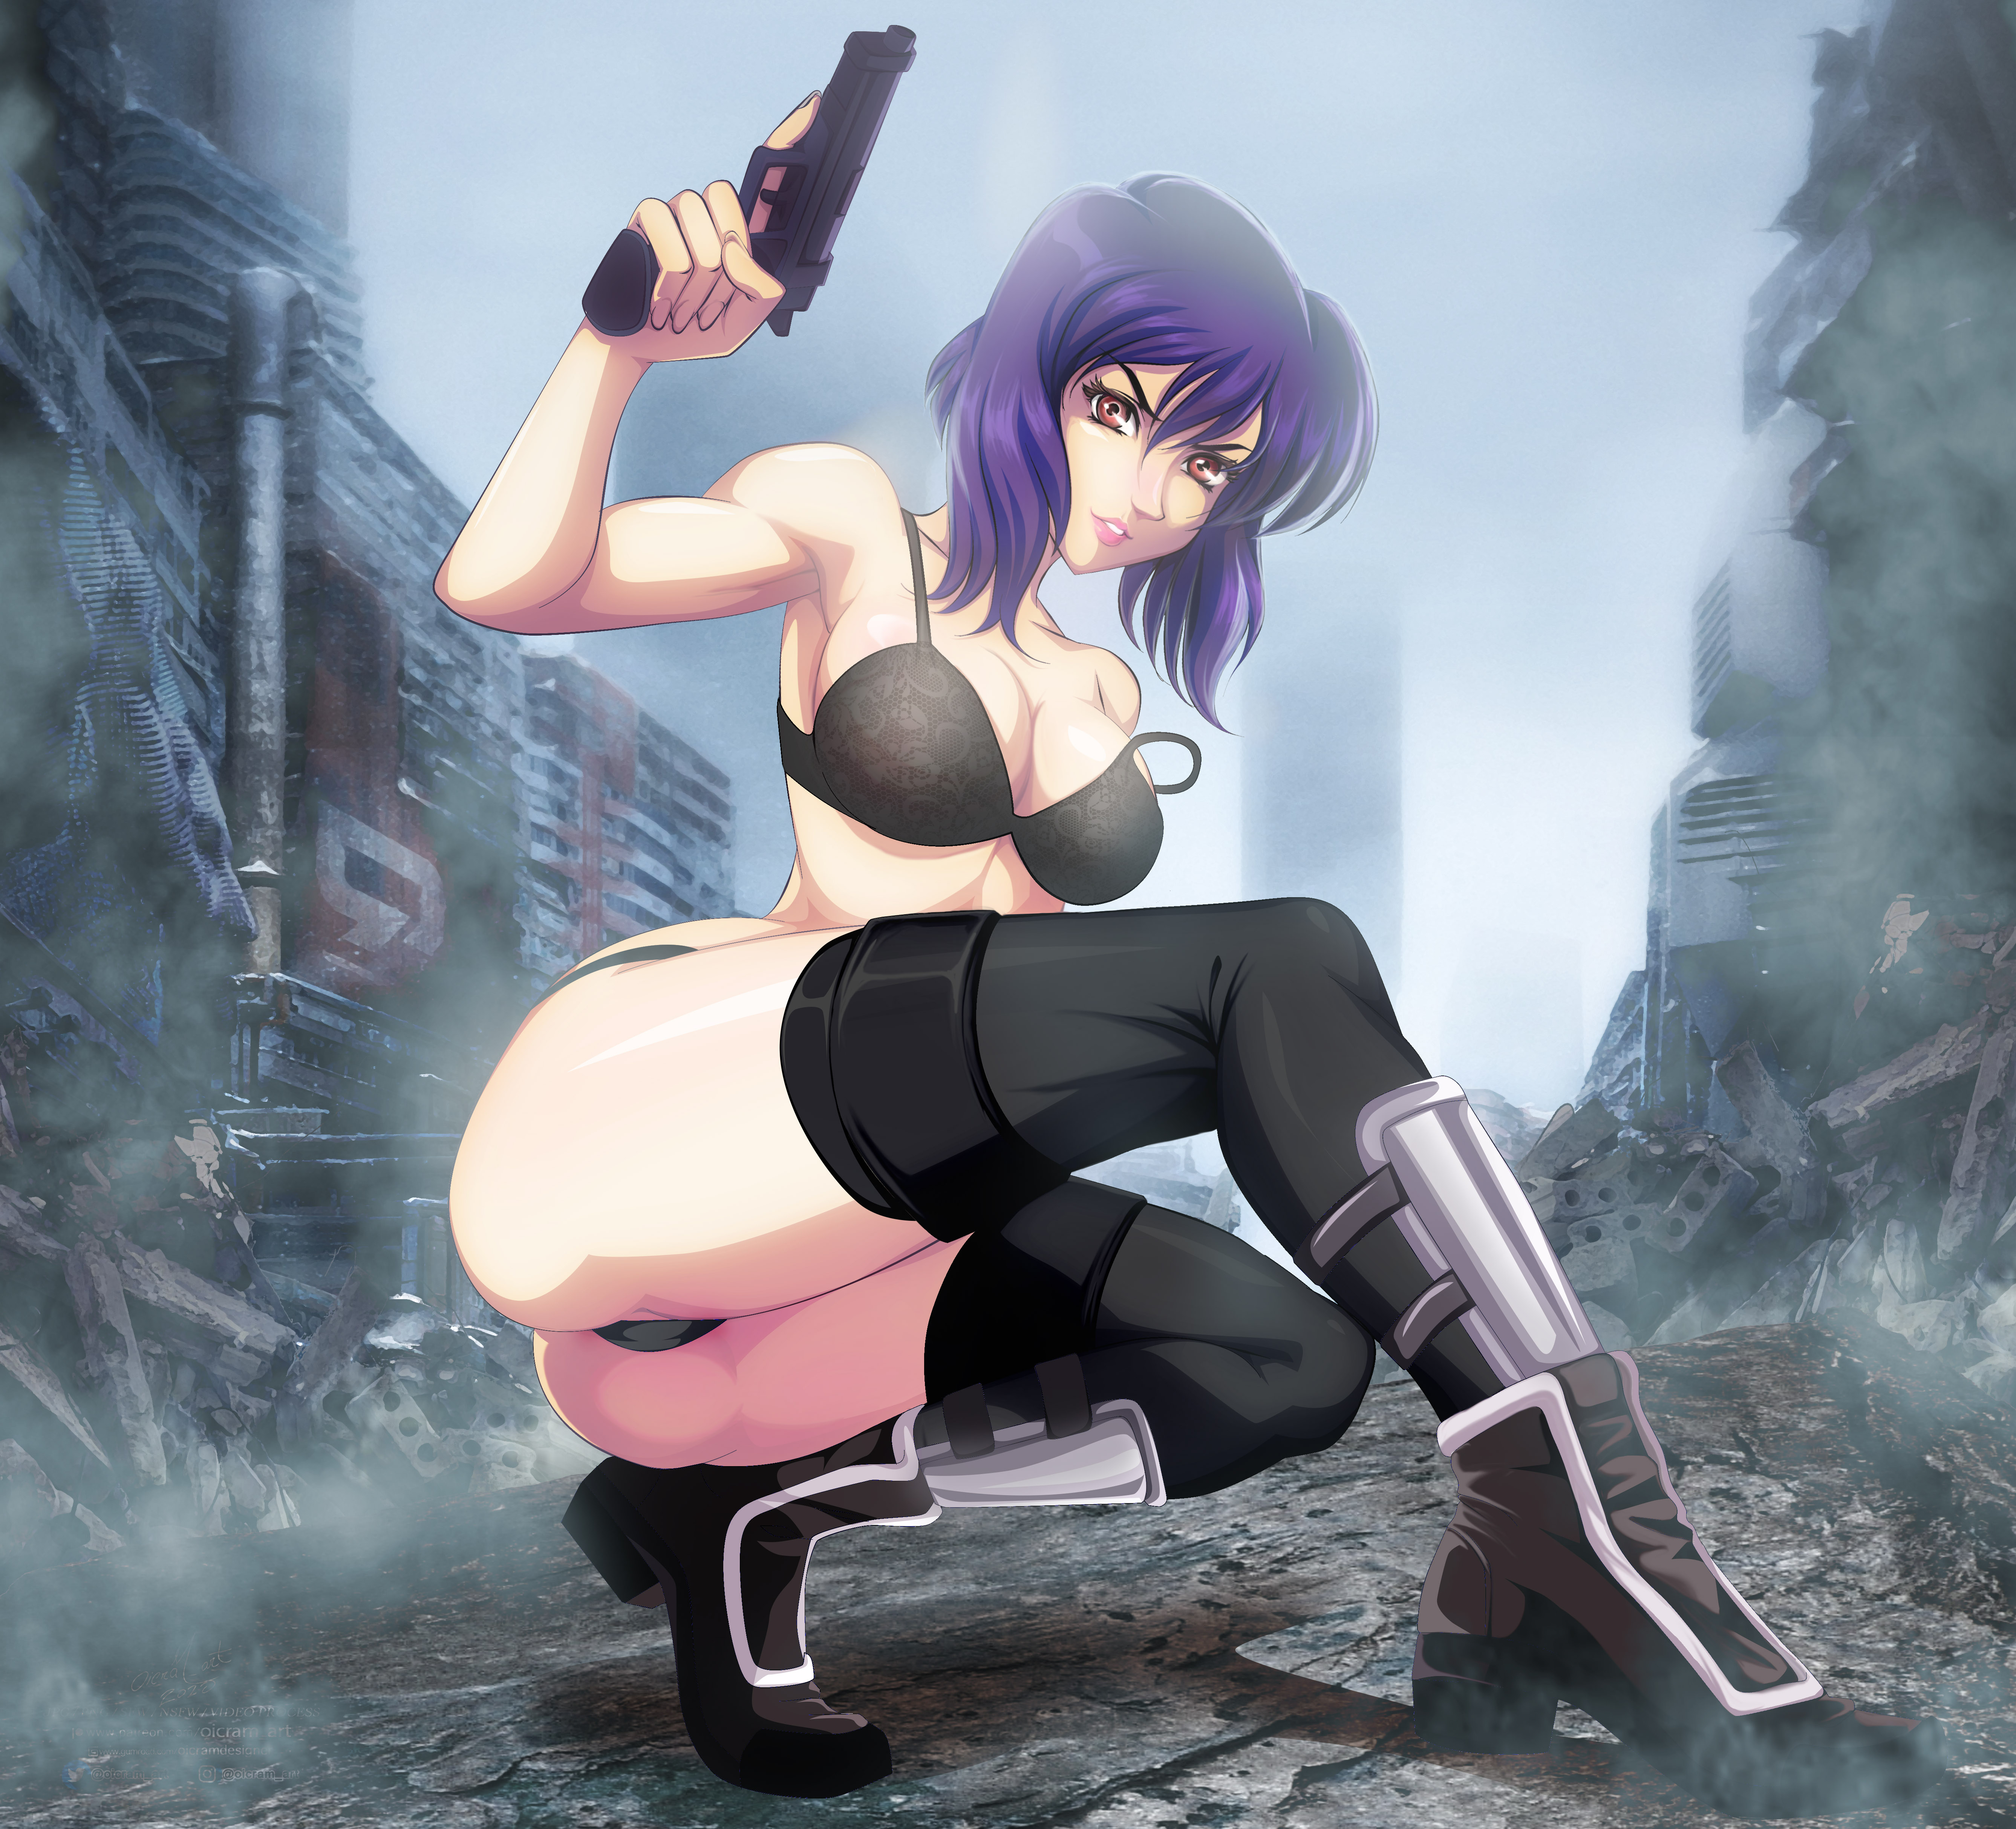 kusanagi motoko, ghost in the shell, cleavage, clothed, lingerie, looking a...